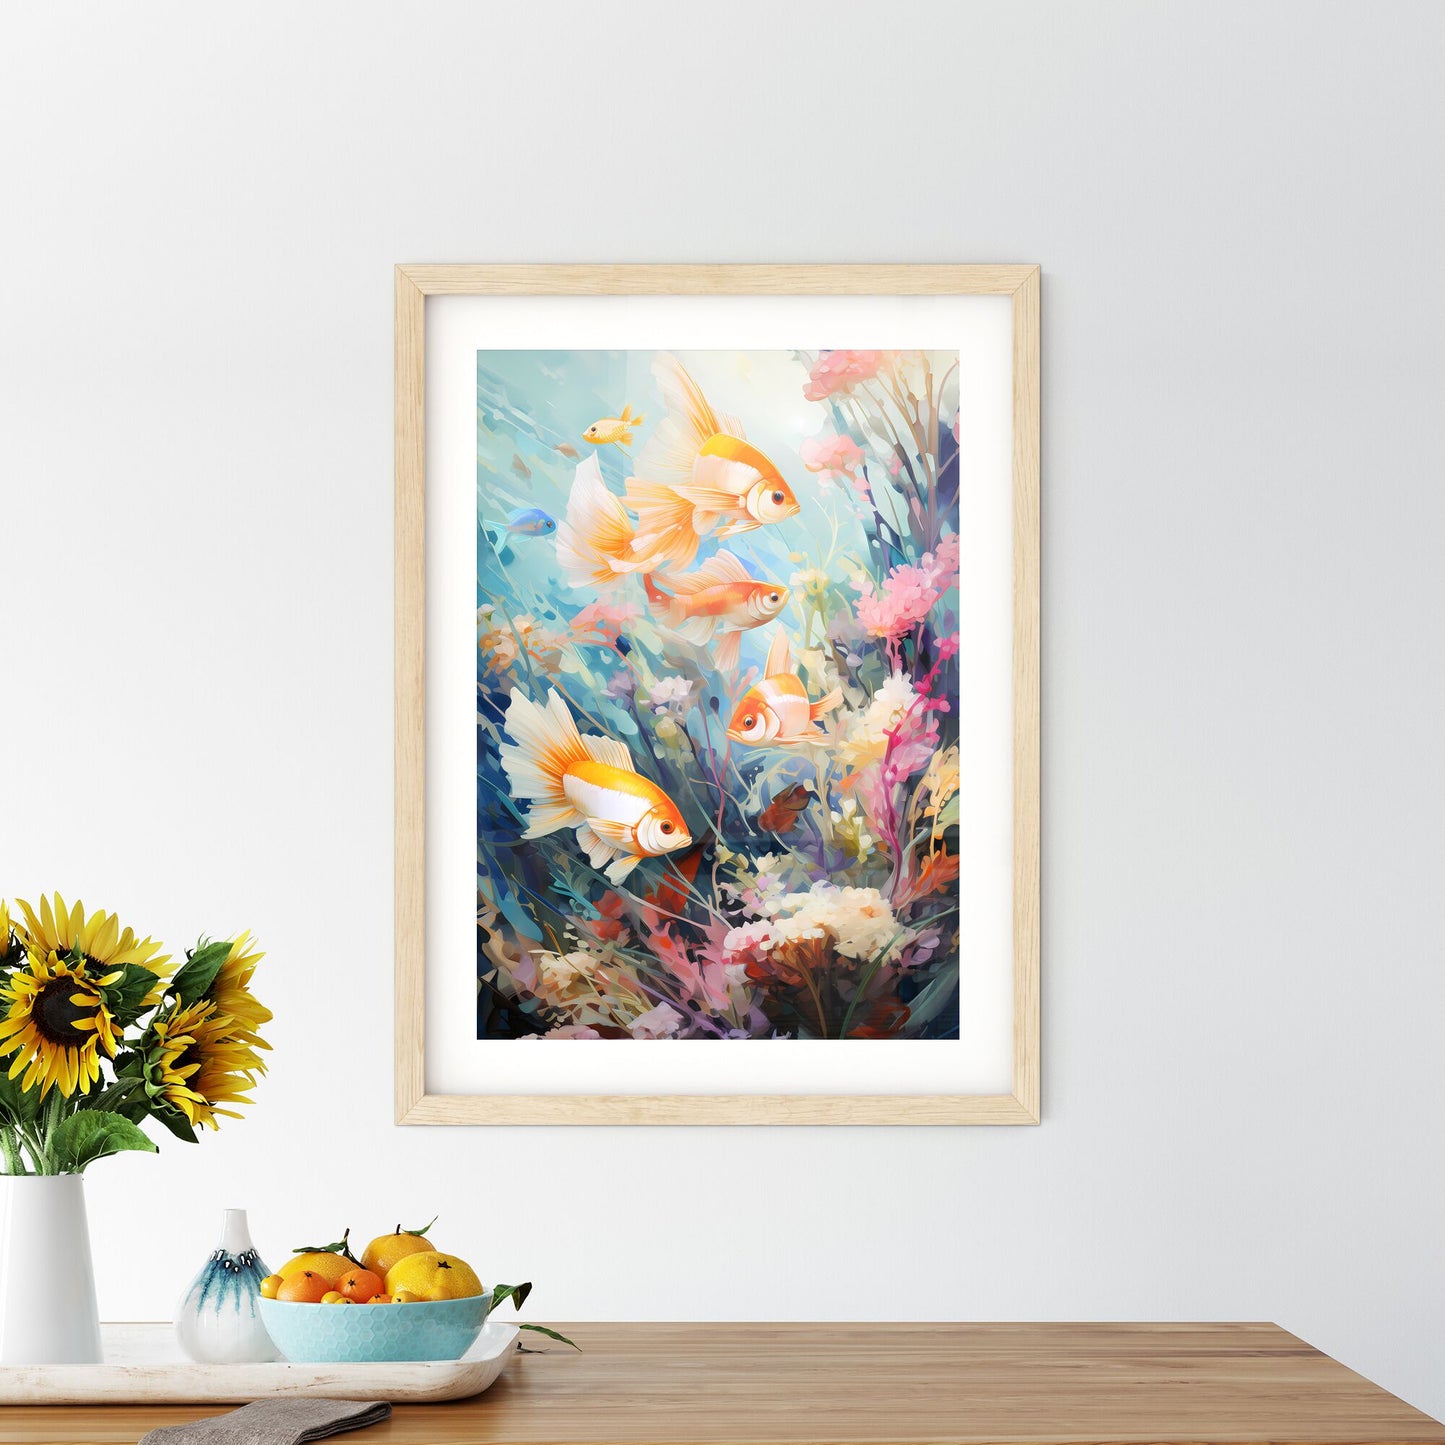 Underwater Aquatic Life With Fishes - A Group Of Goldfish Swimming In Water Default Title